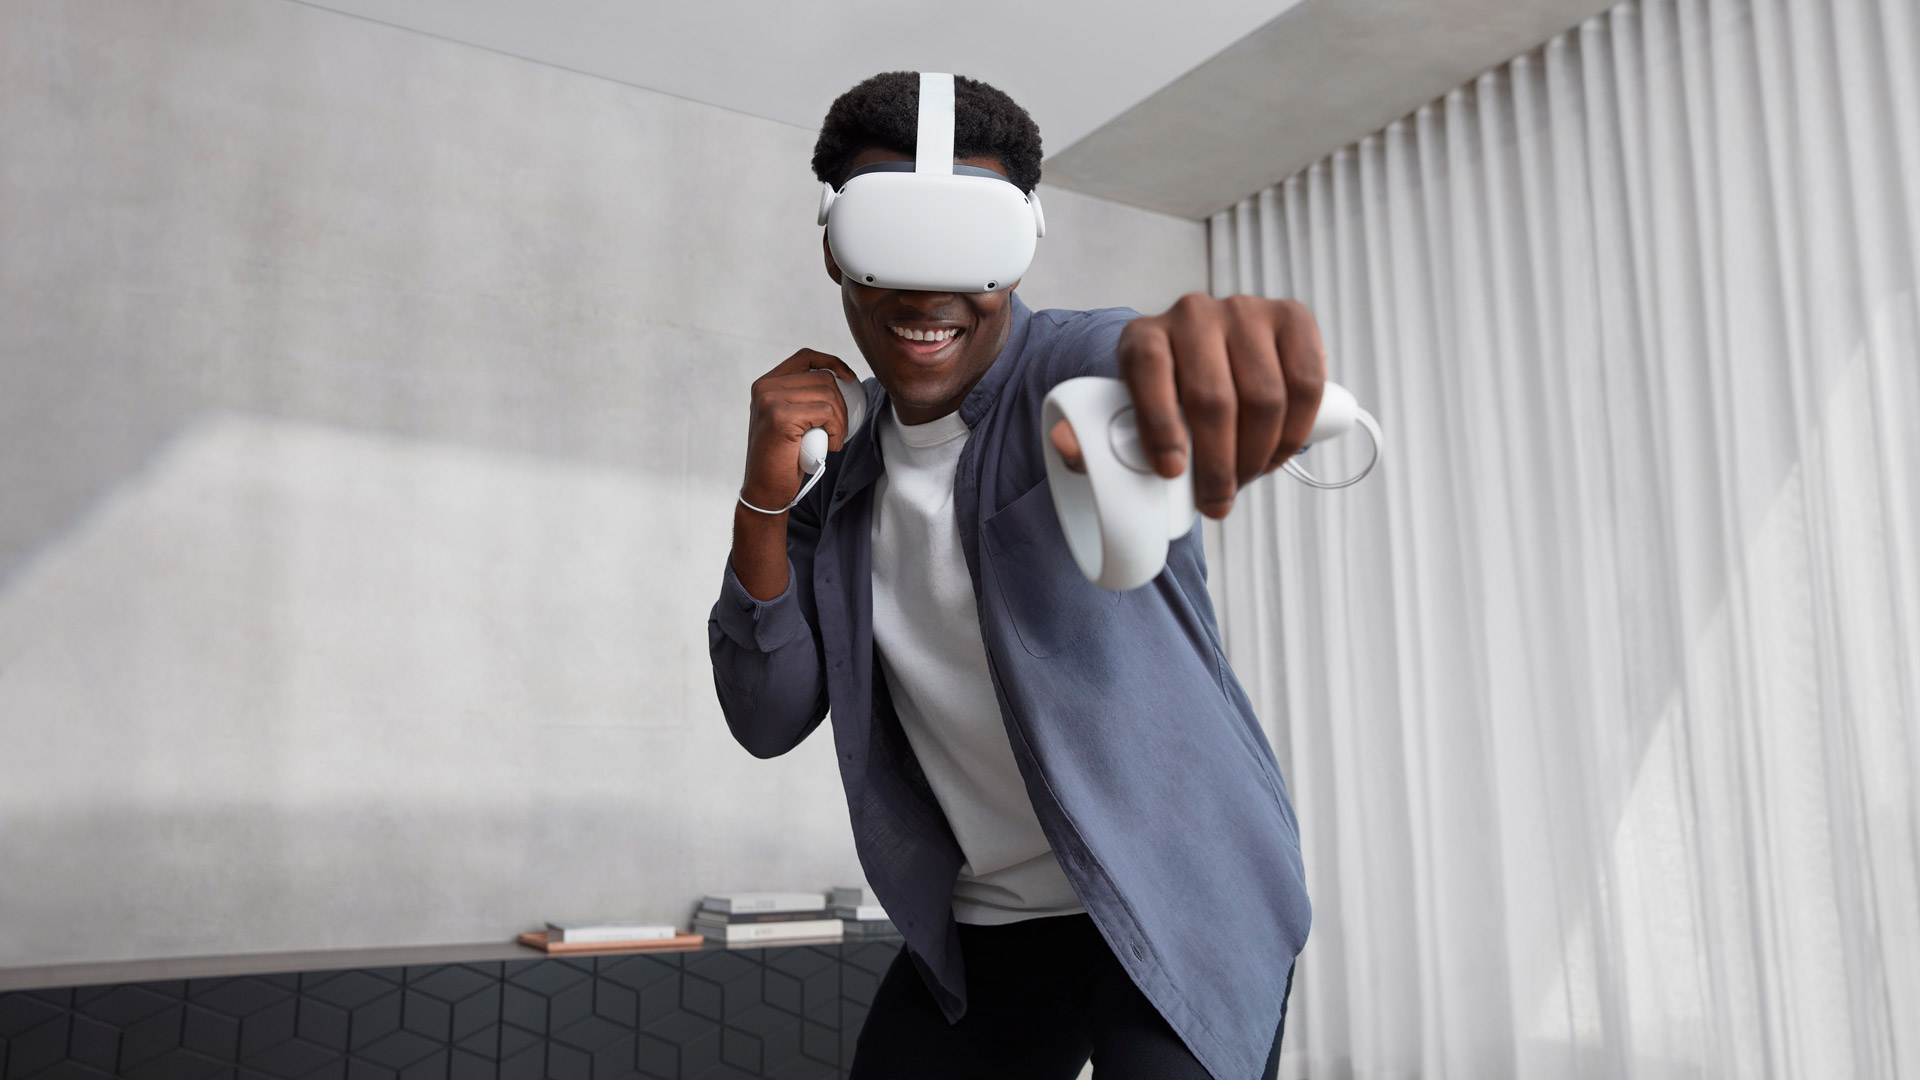 oculus quest before you buy